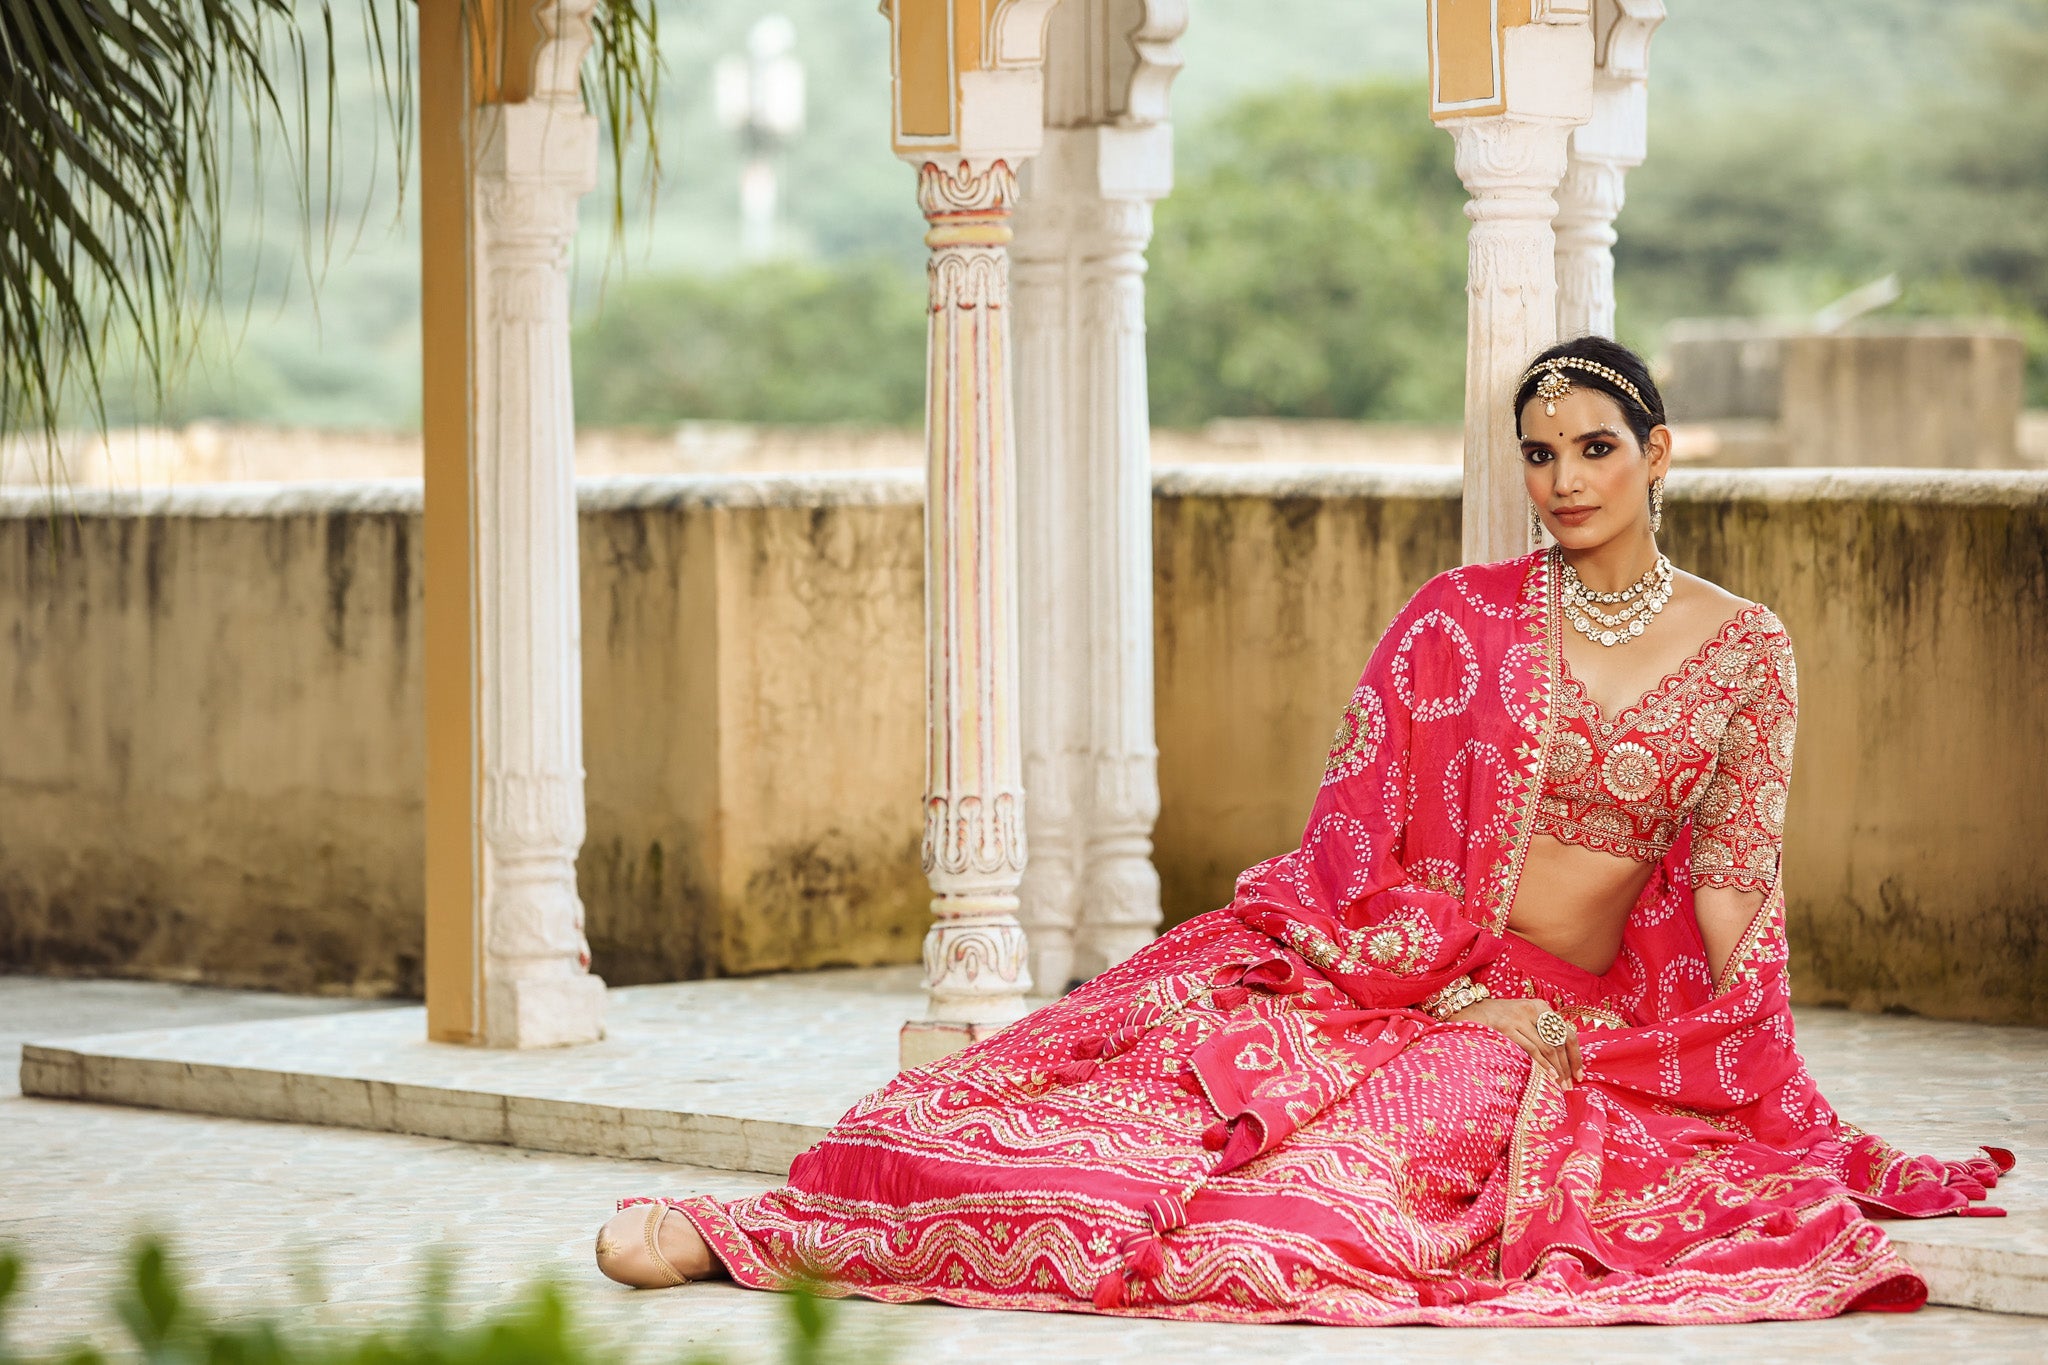 30Z256-RO Pink Indian Wear Lehenga Set With Heavy Embroidery